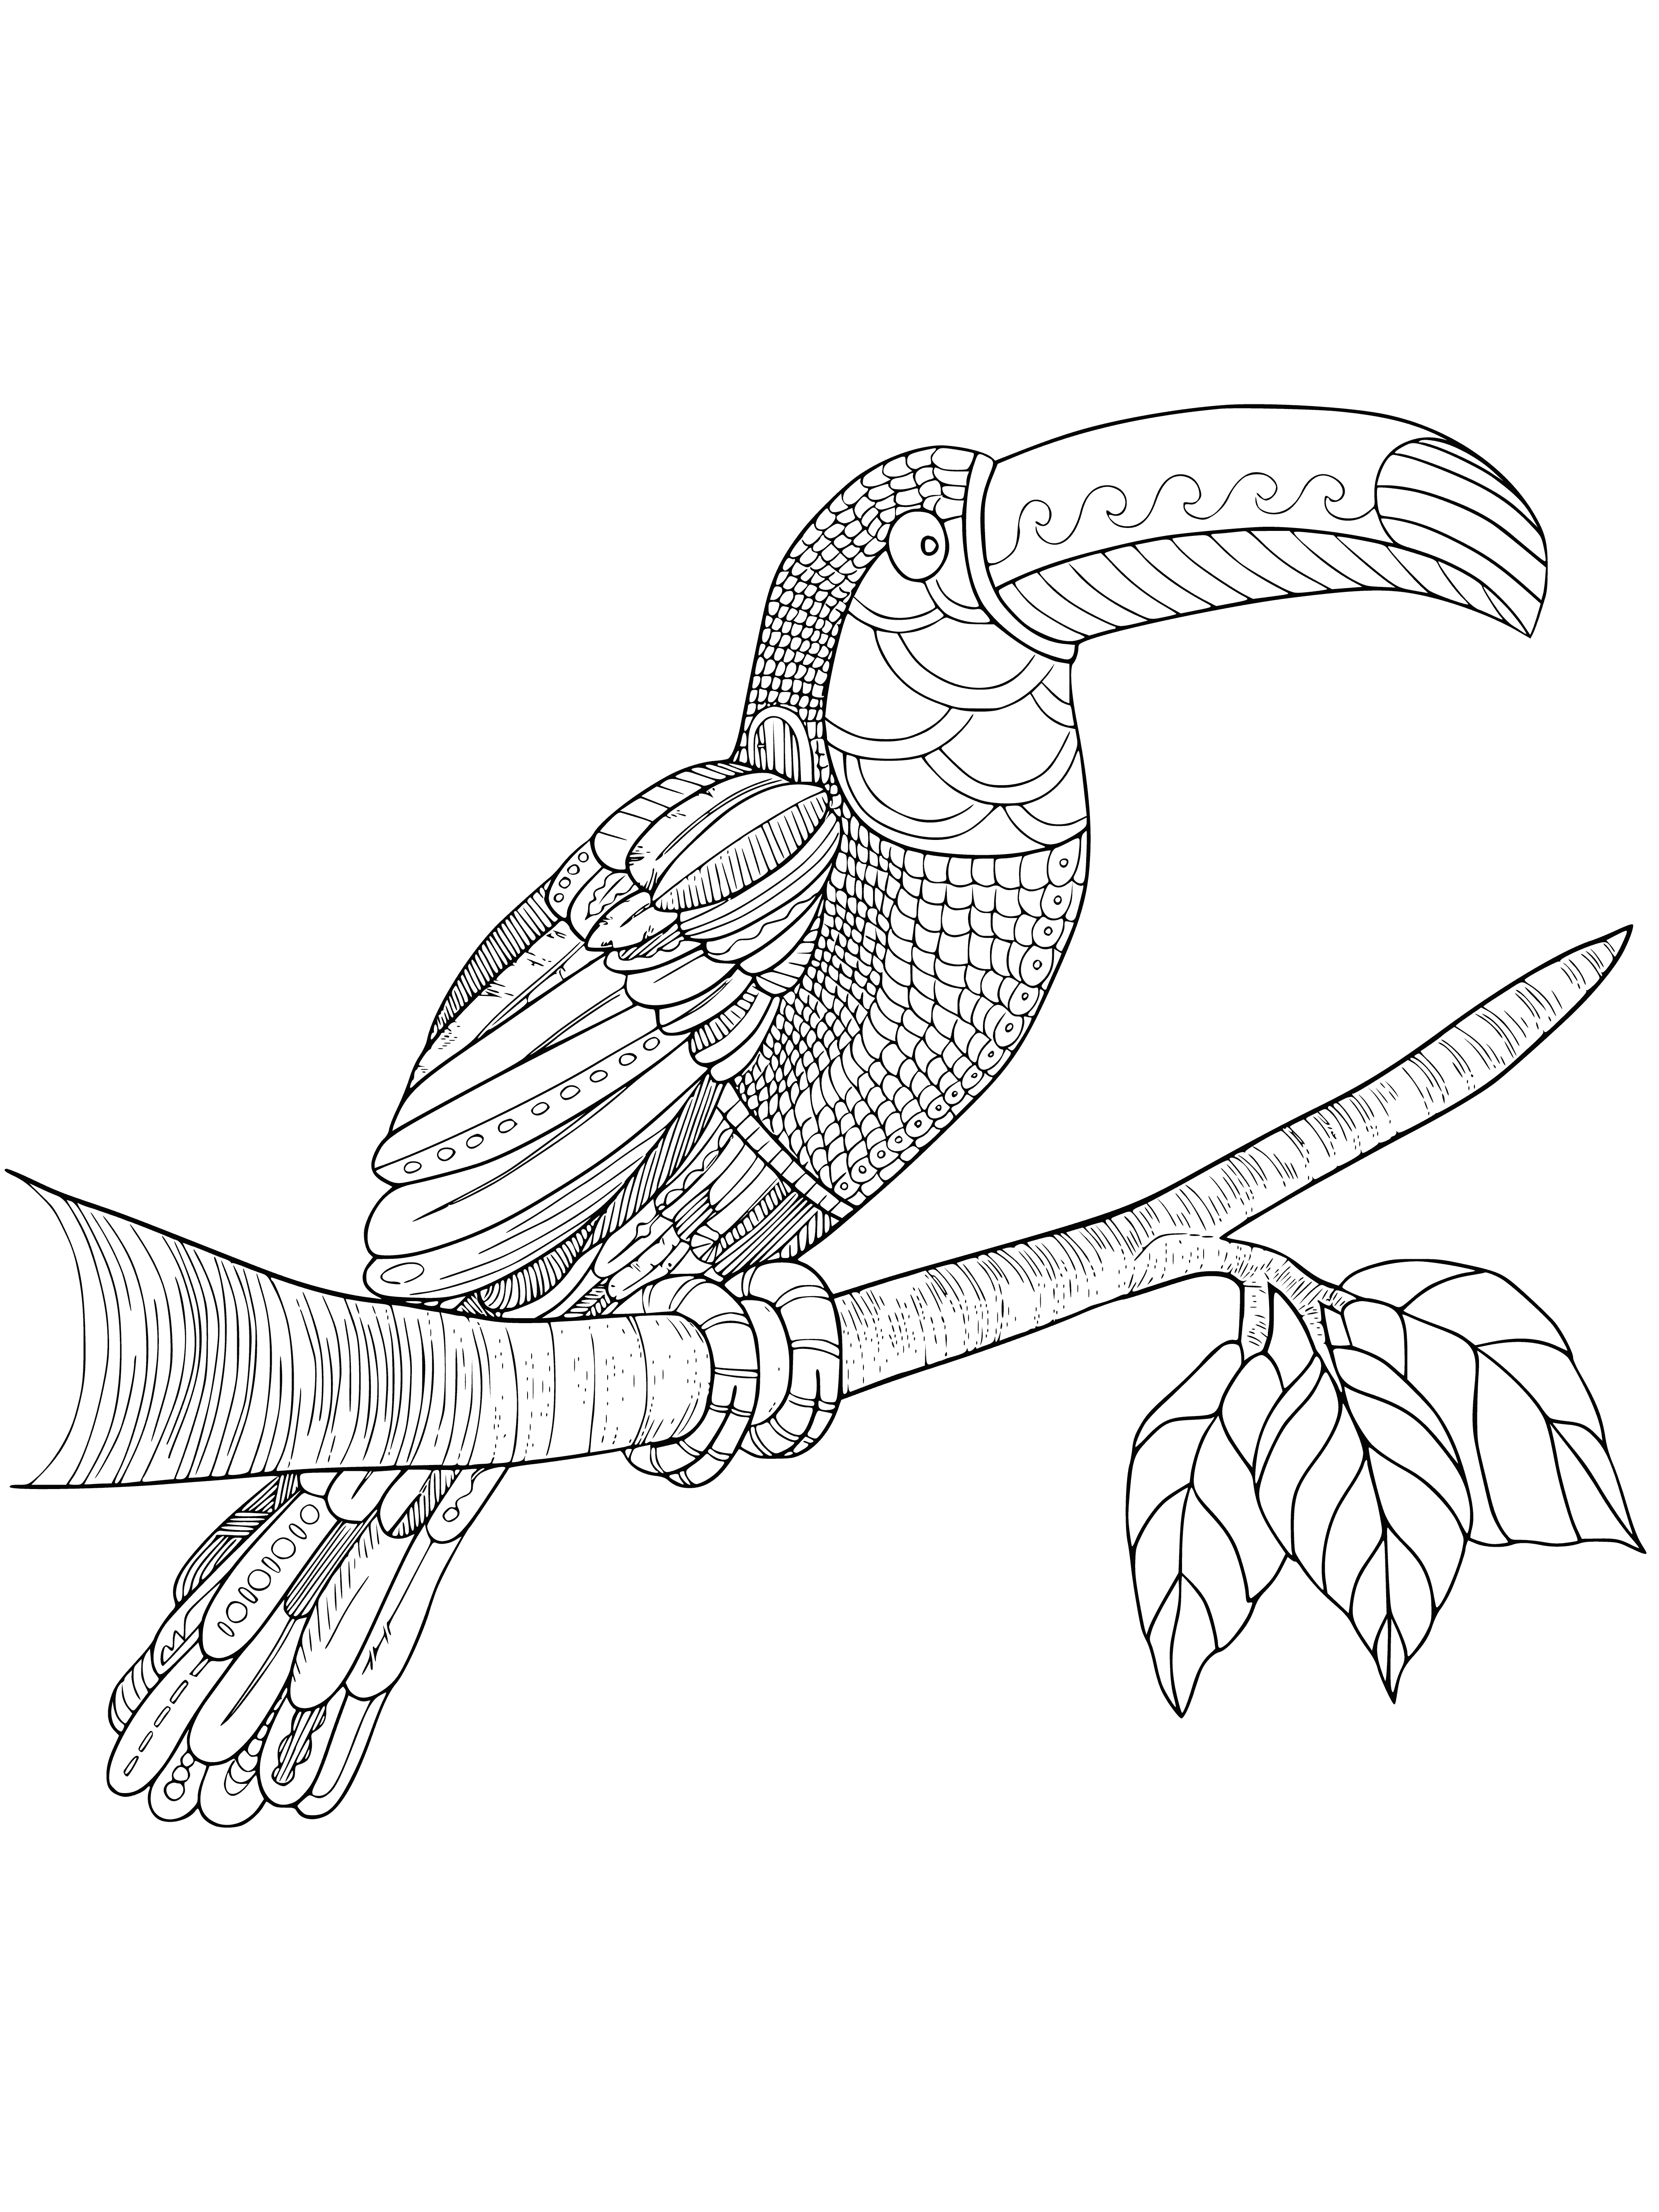 coloring page: Toucan perched atop branch, striking contrast of its colorful feathers vs. lush green jungle. Beak open, as if ready to sing.